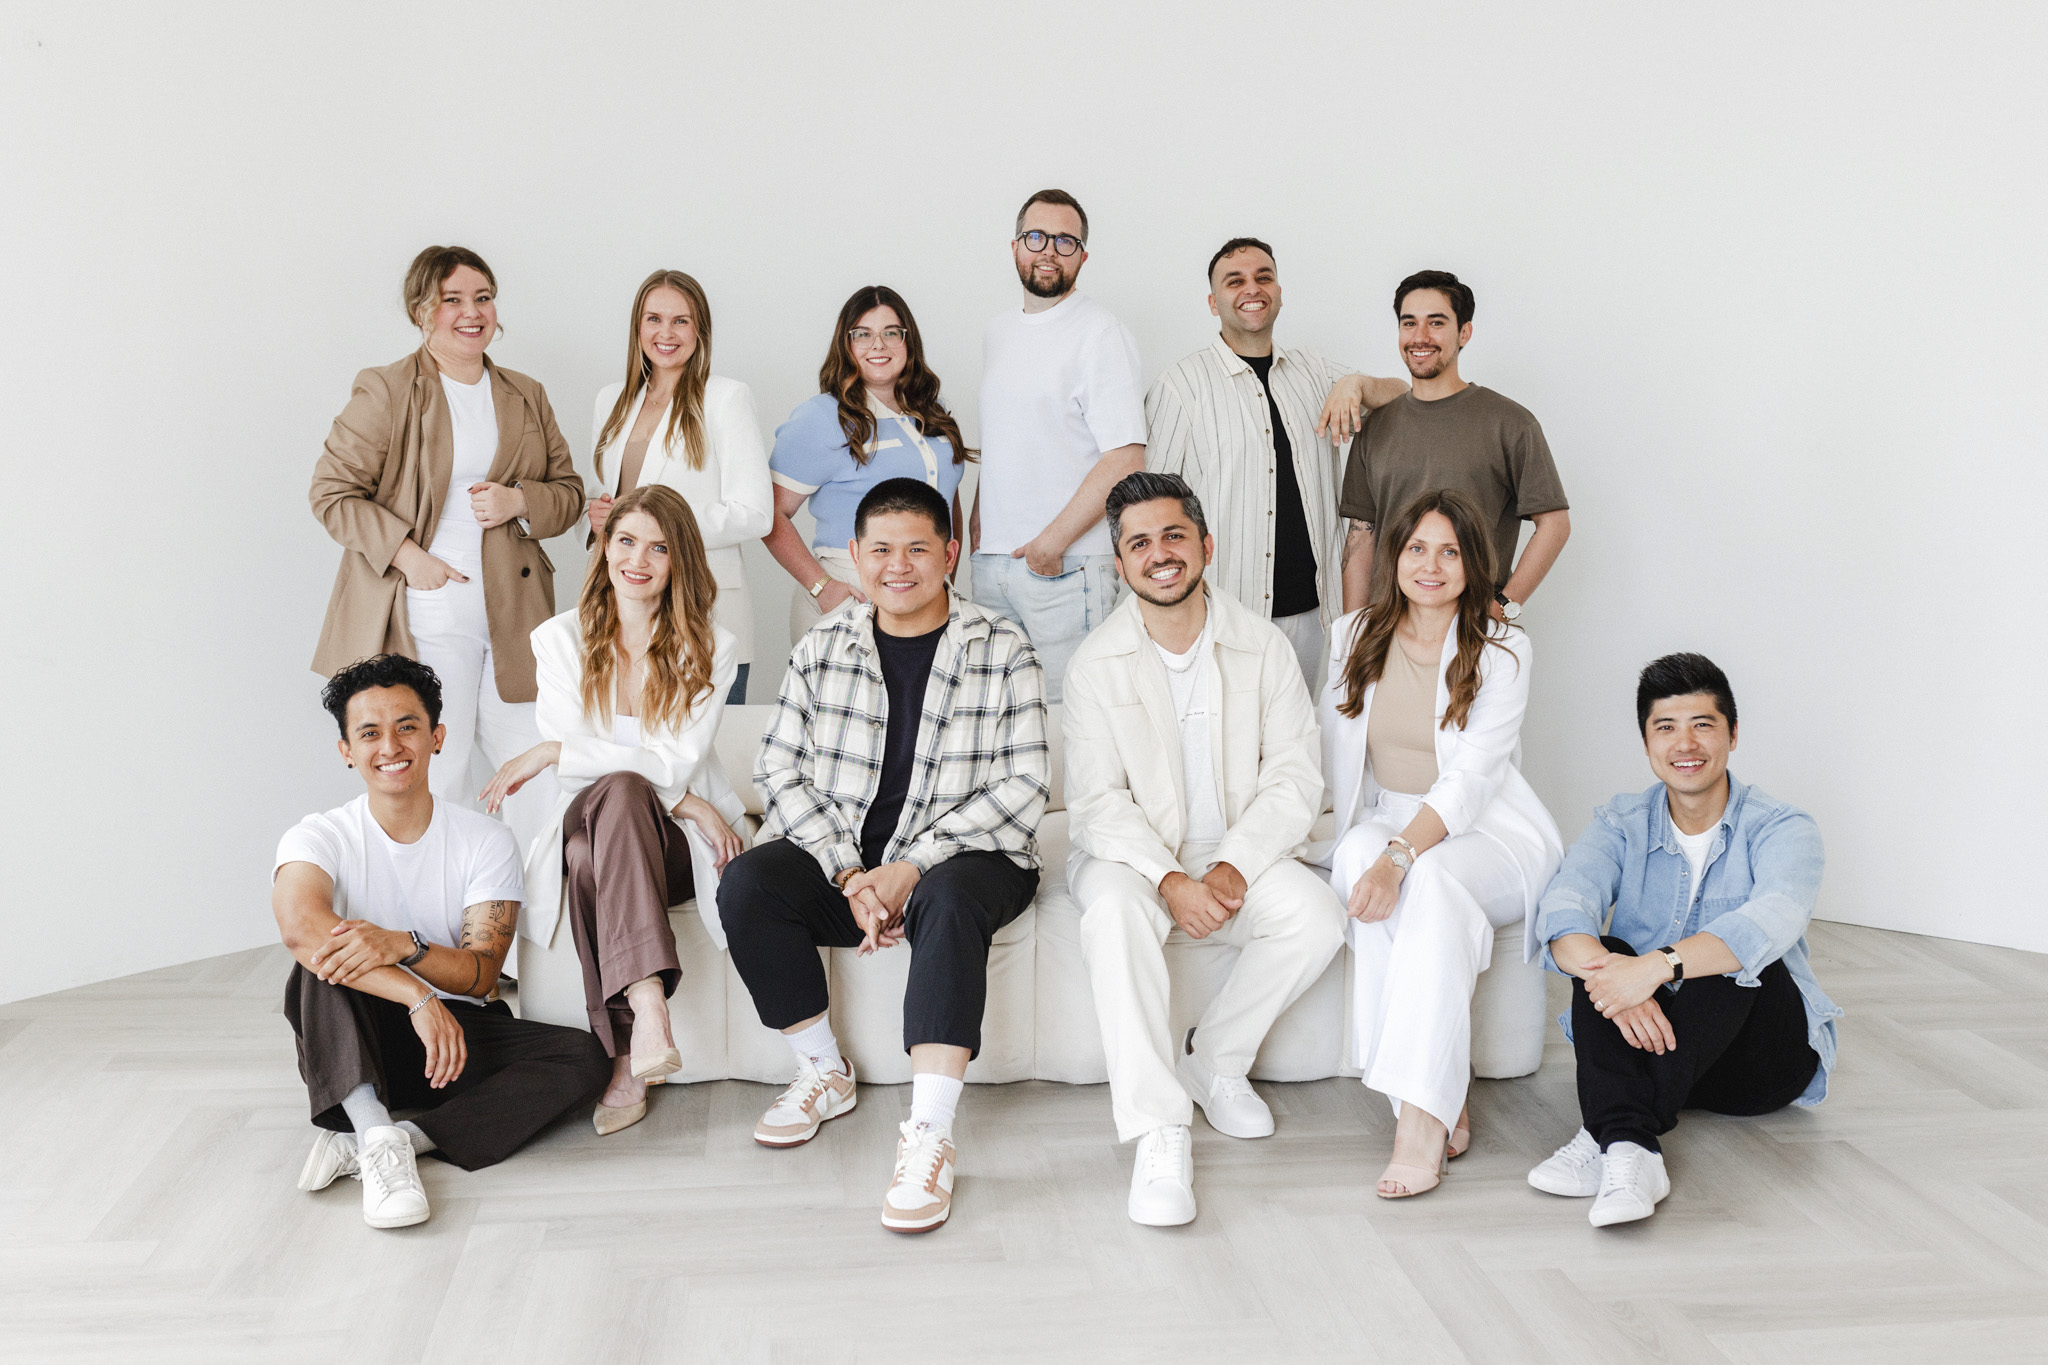 A creative team of thirteen people, casually dressed, poses together in a brightly lit room with a white background.